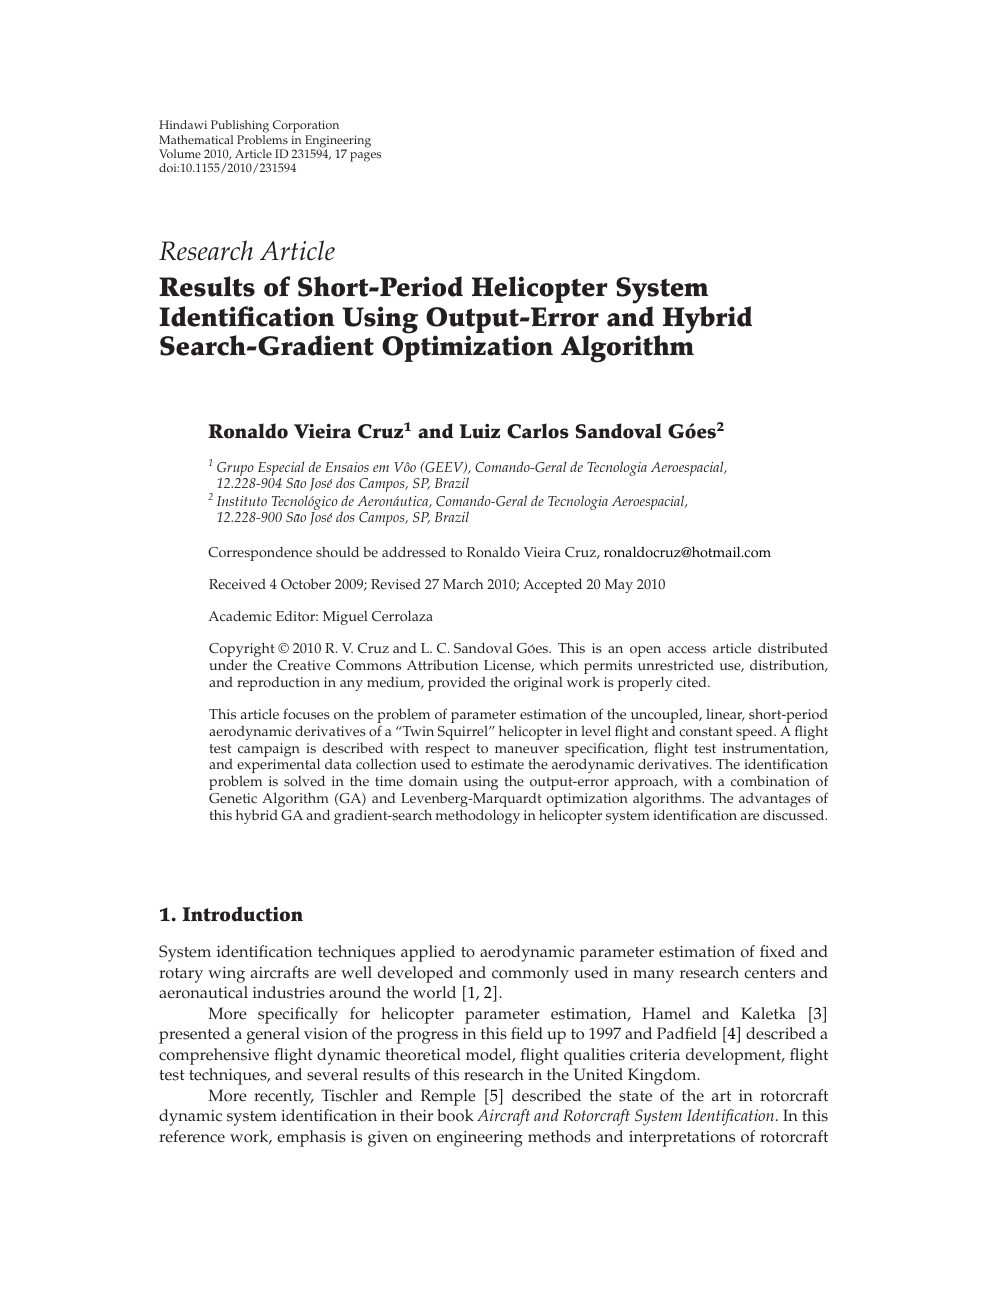 Results Of Short Period Helicopter System Identification Using Output Error And Hybrid Search Gradient Optimization Algorithm Topic Of Research Paper In Mathematics Download Scholarly Article Pdf And Read For Free On Cyberleninka Open Science